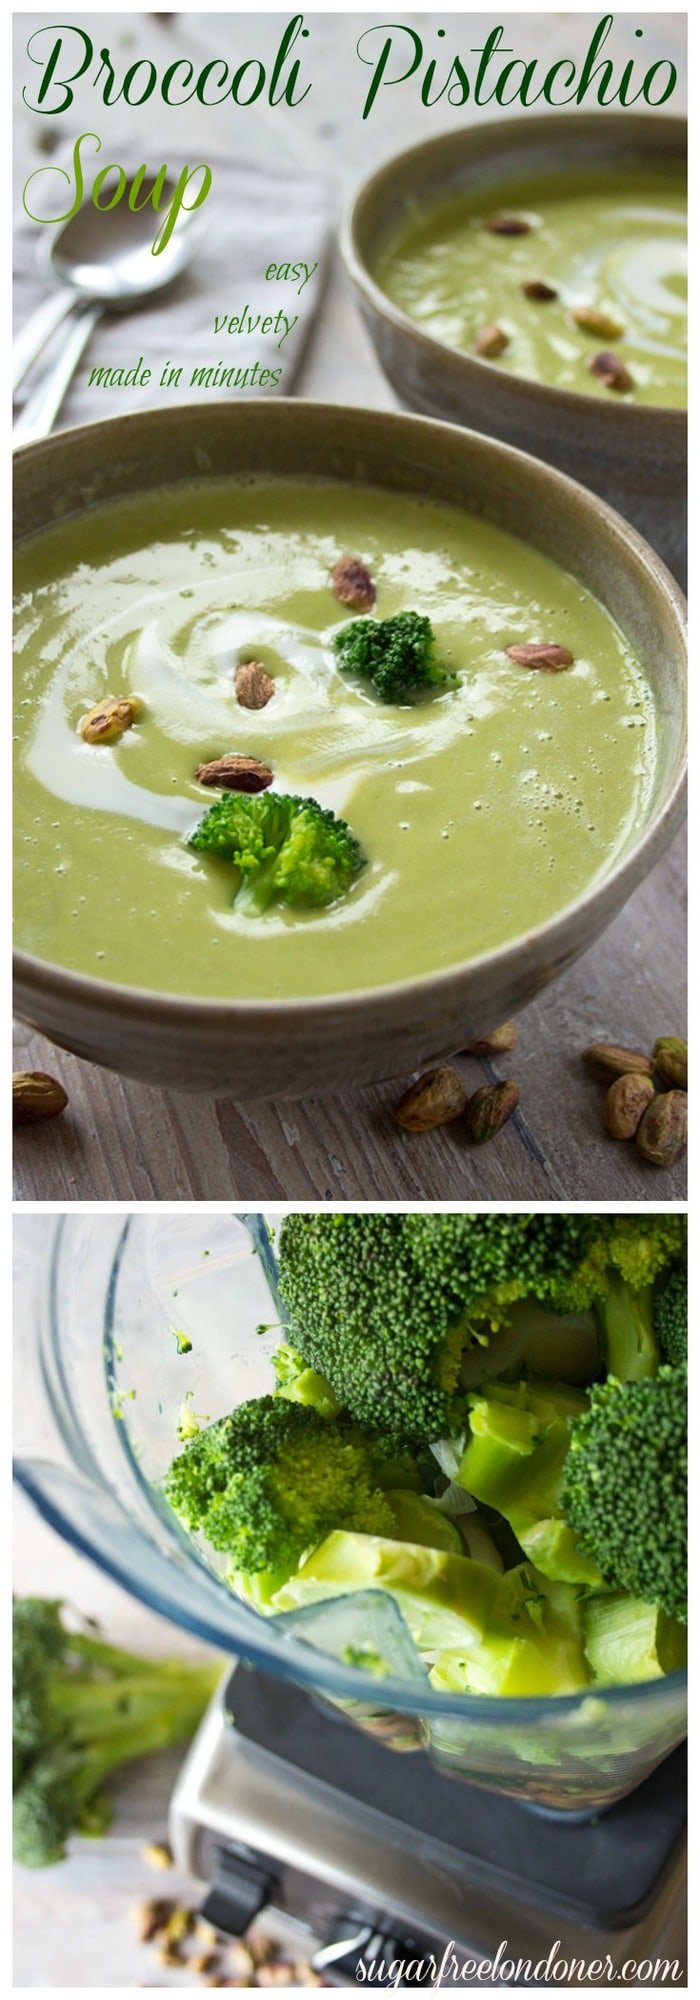 This smooth and creamy broccoli pistachio soup is an easy and delicious way to load up on antioxidants and vitamin C. Great as a quick, warming lunch or as a light starter course.